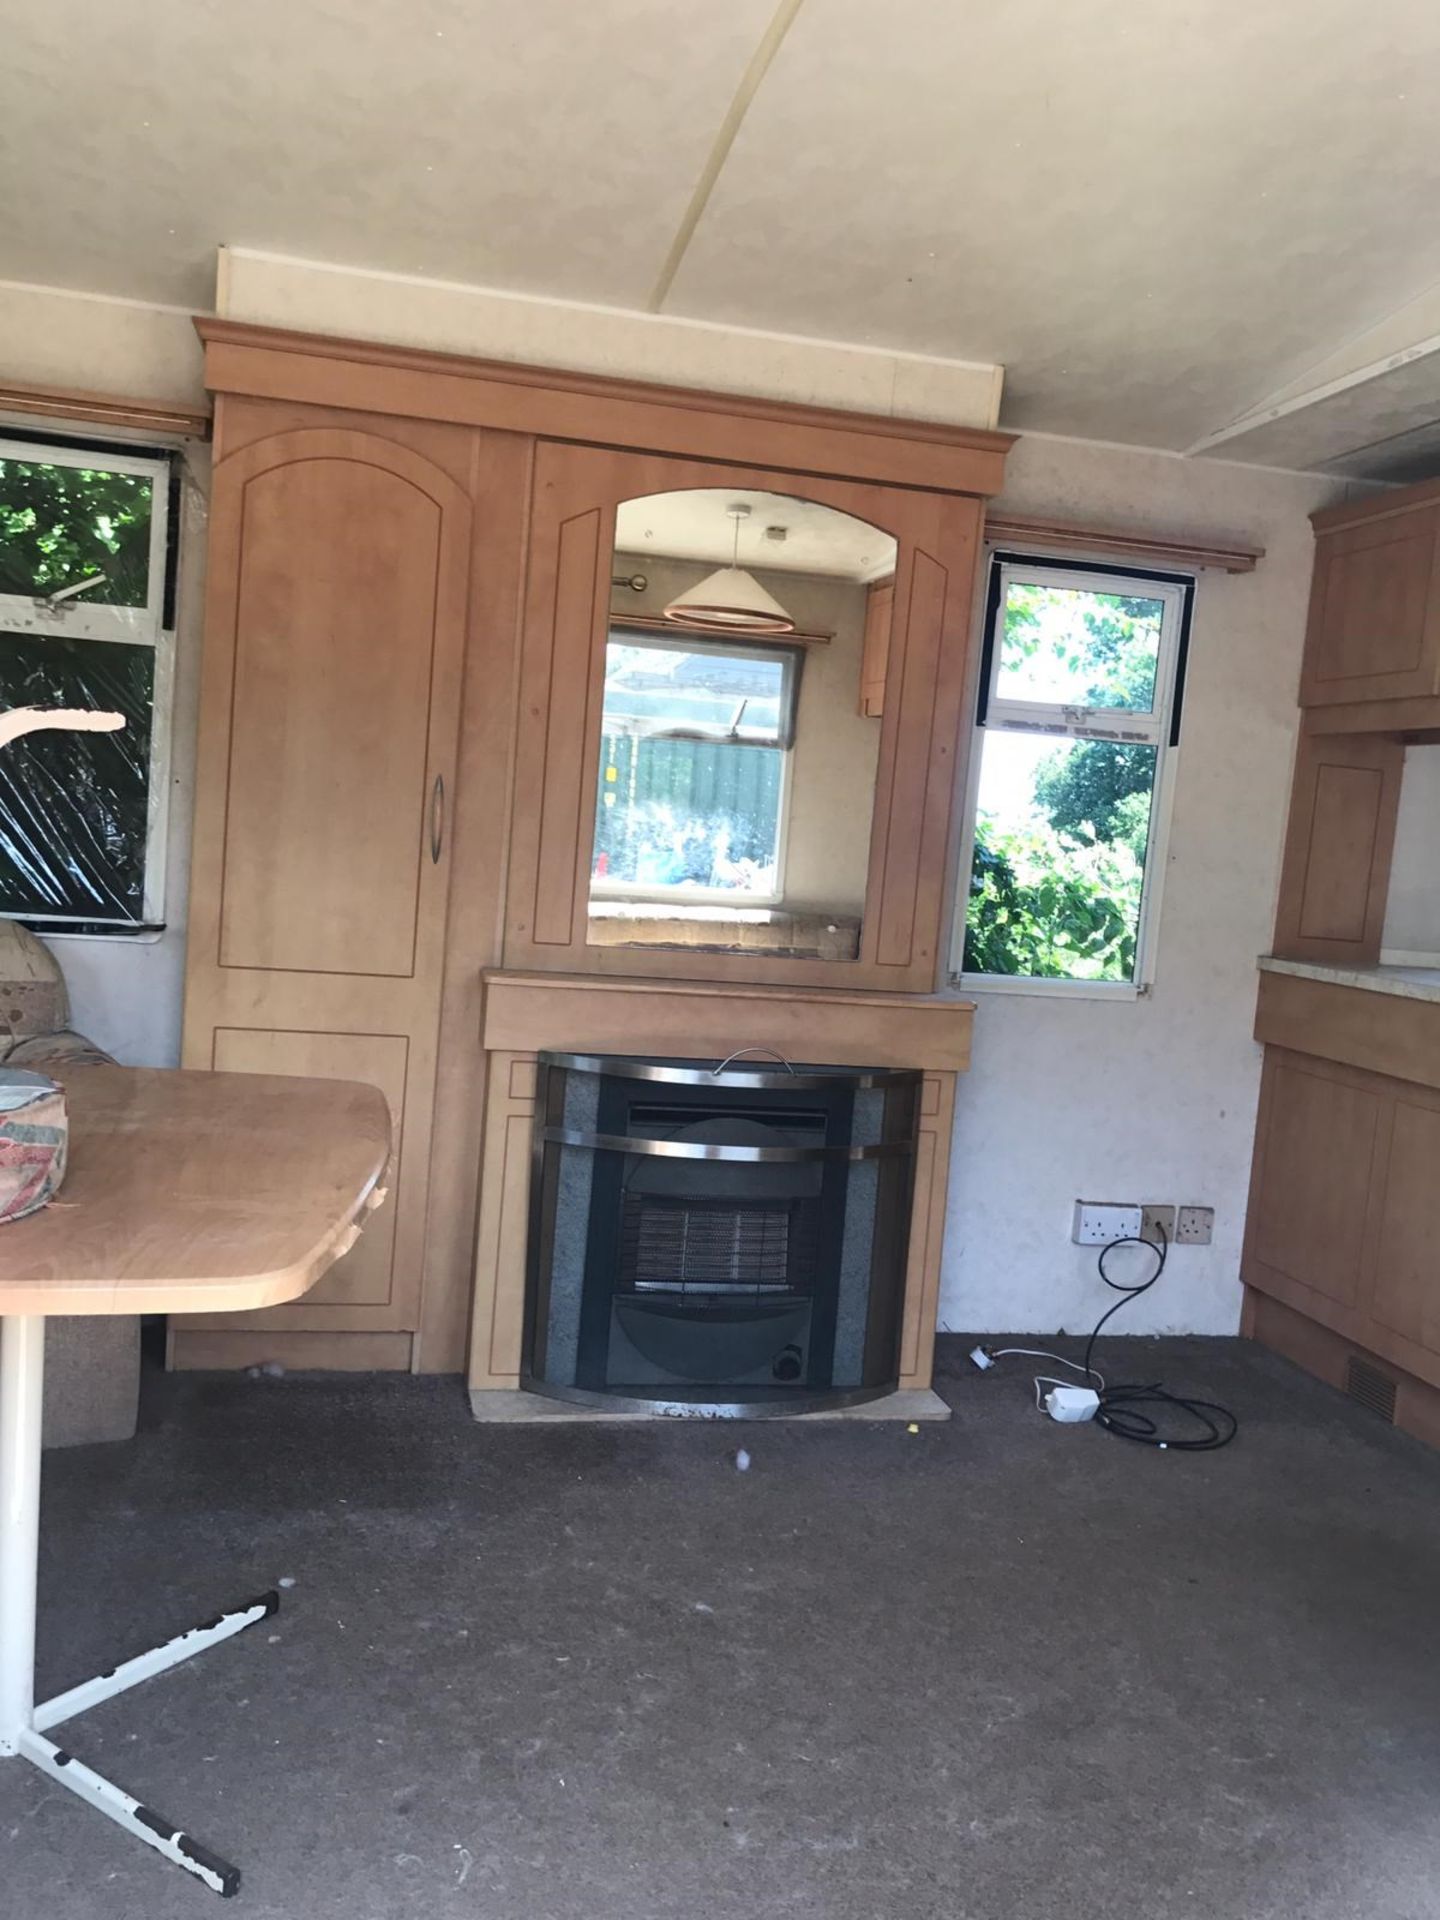 GOOD STATIC CARAVAN / MOBILE HOME - TO BE REMOVED WITHIN 5 DAYS, NO RESERVE! *NO VAT* - Image 18 of 18